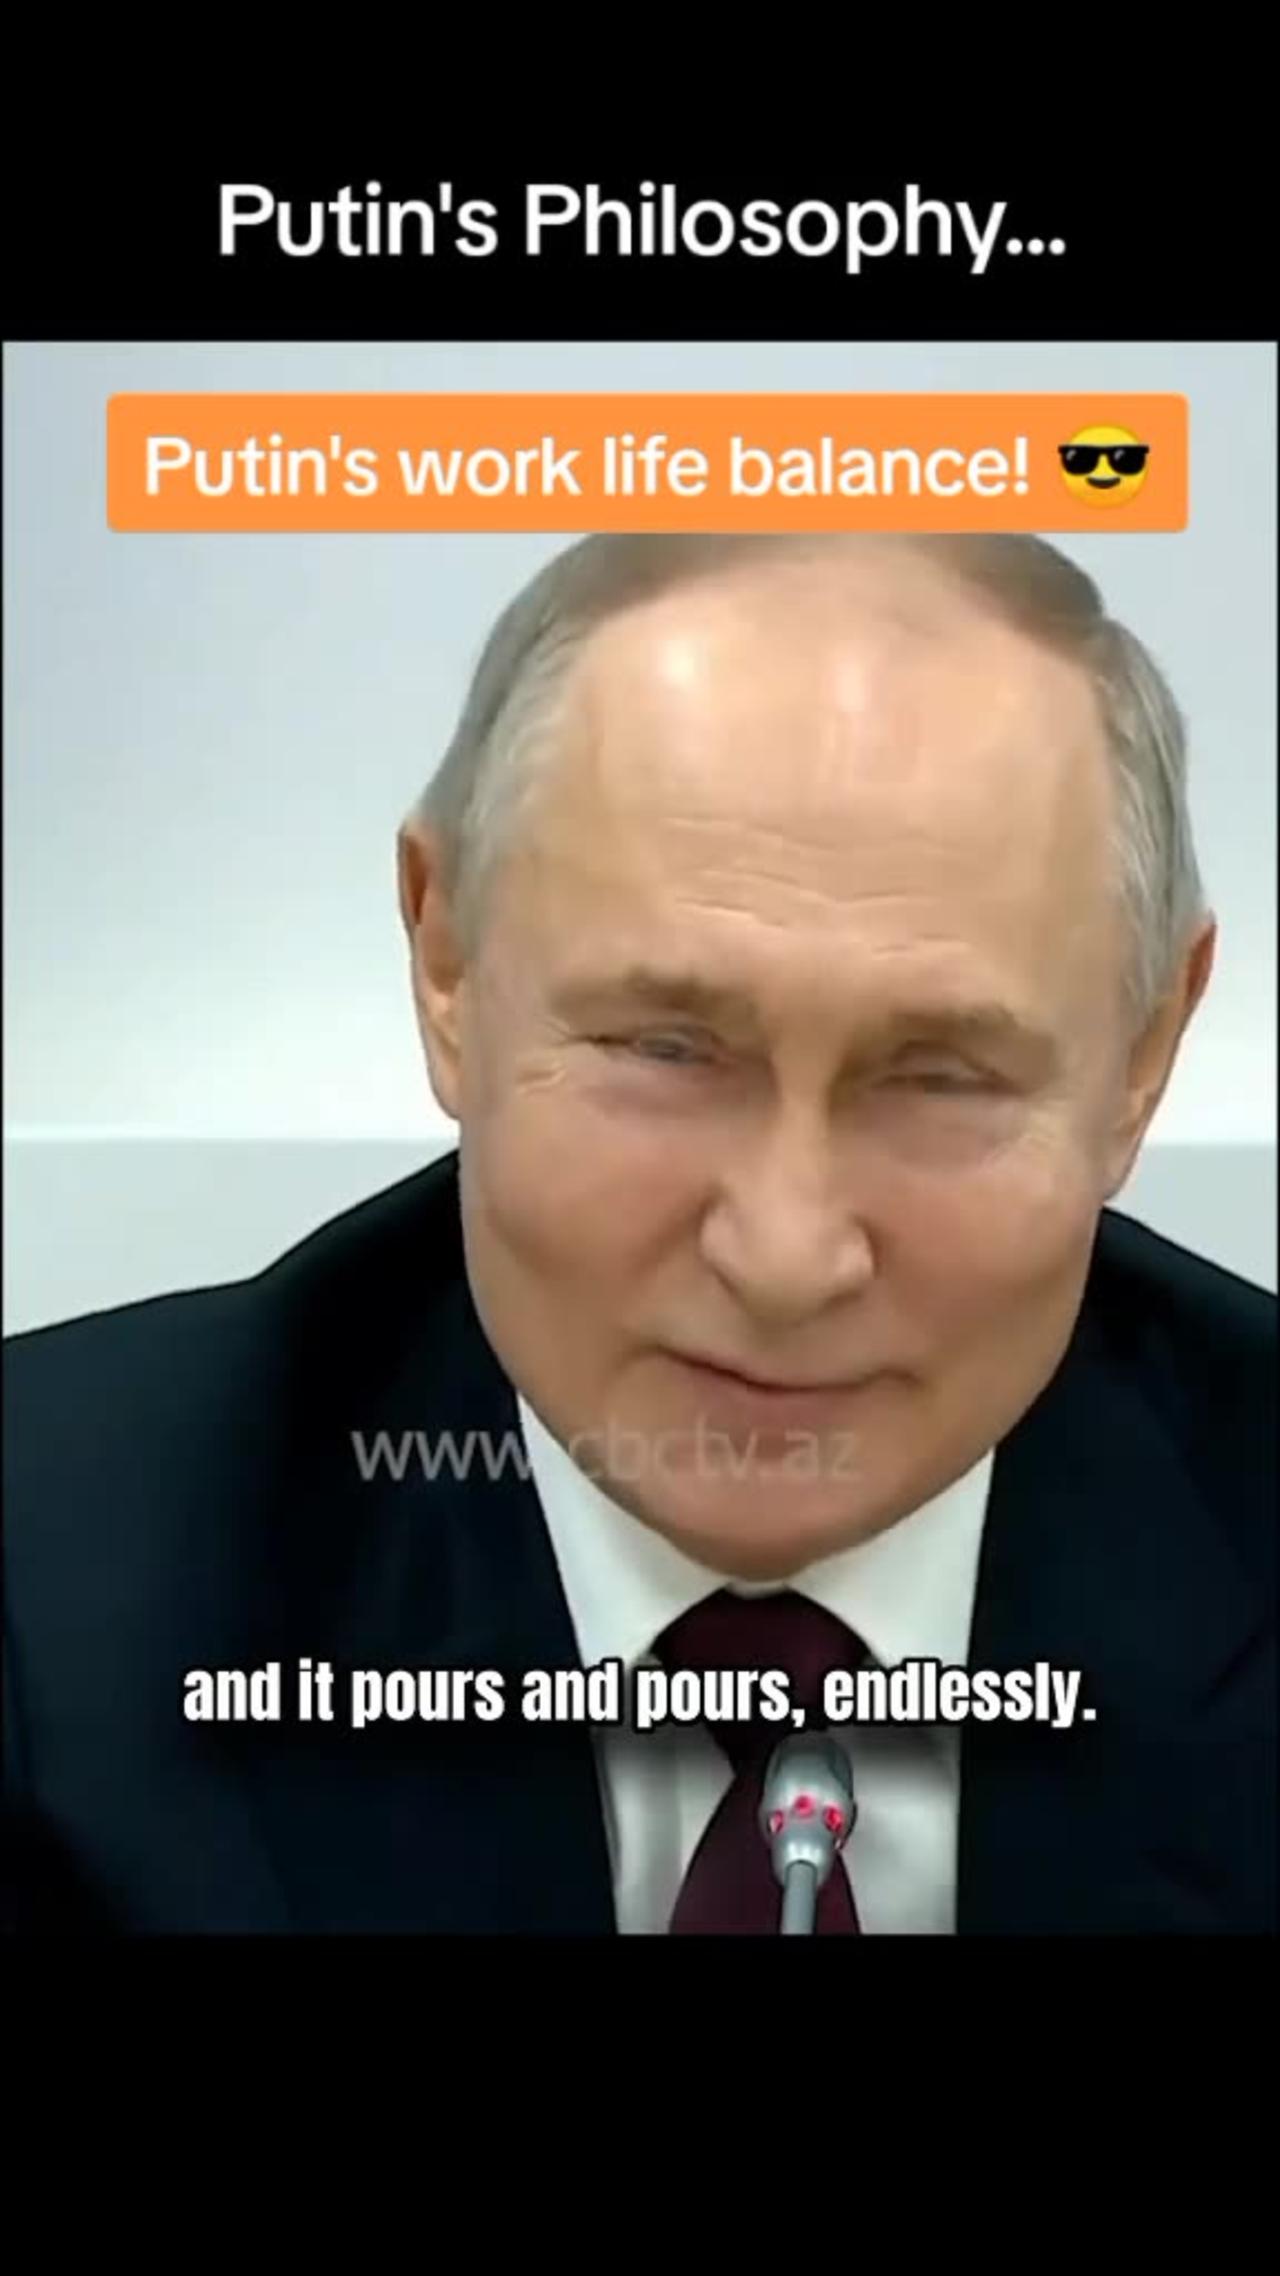 Putin shares how difficult it is to balance his line of work with personal life.